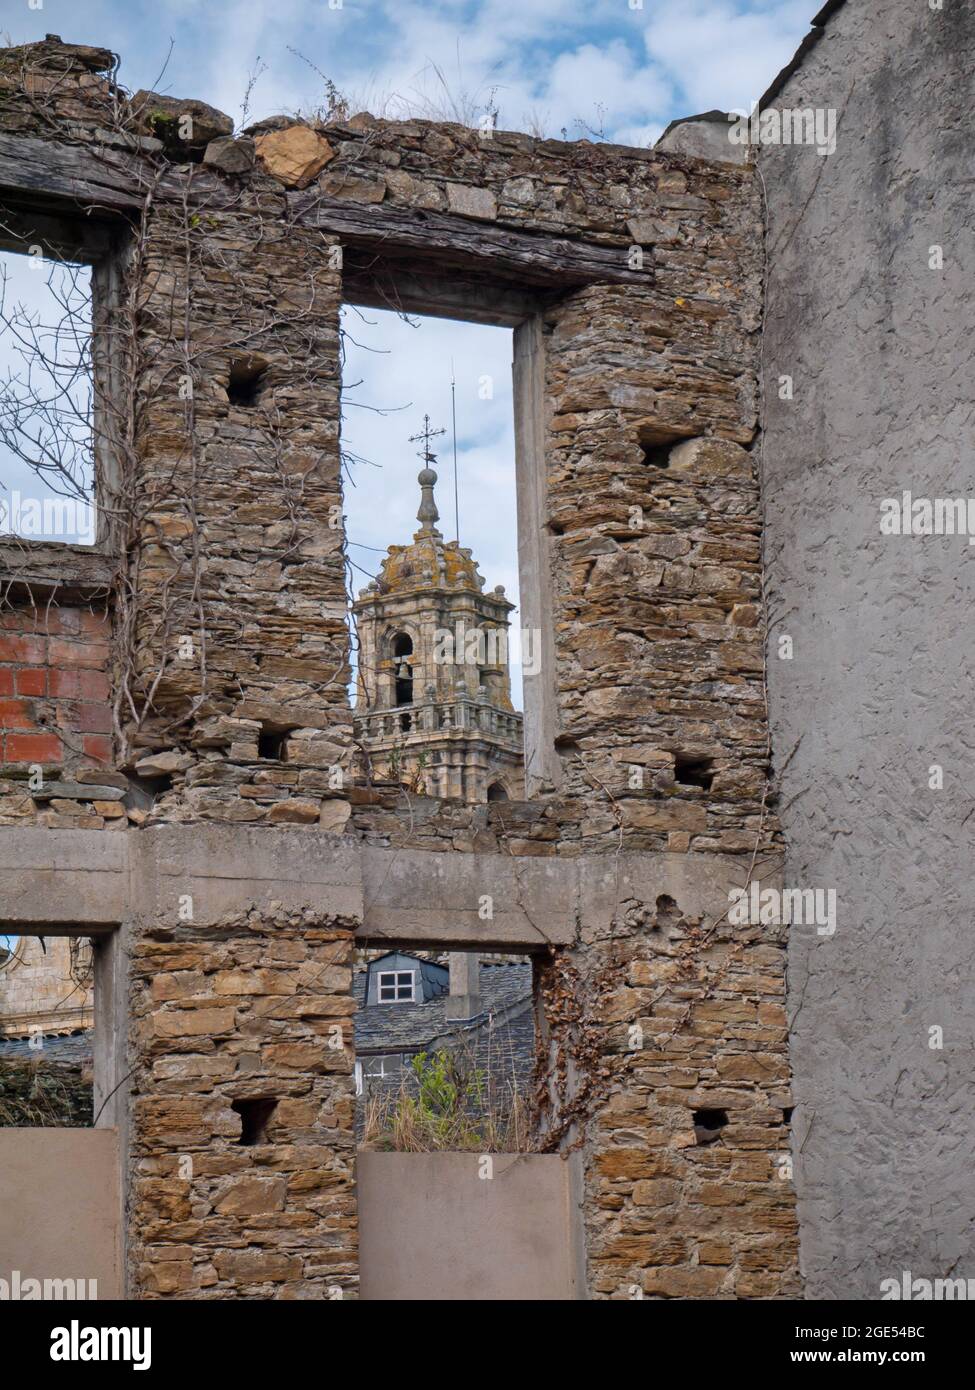 MONDONEDO, SPAIN - AUGUST 08, 2021: View of the cathedral in the town of Mondonedo thru the ruins,Lugo,Galicia,Spain Stock Photo